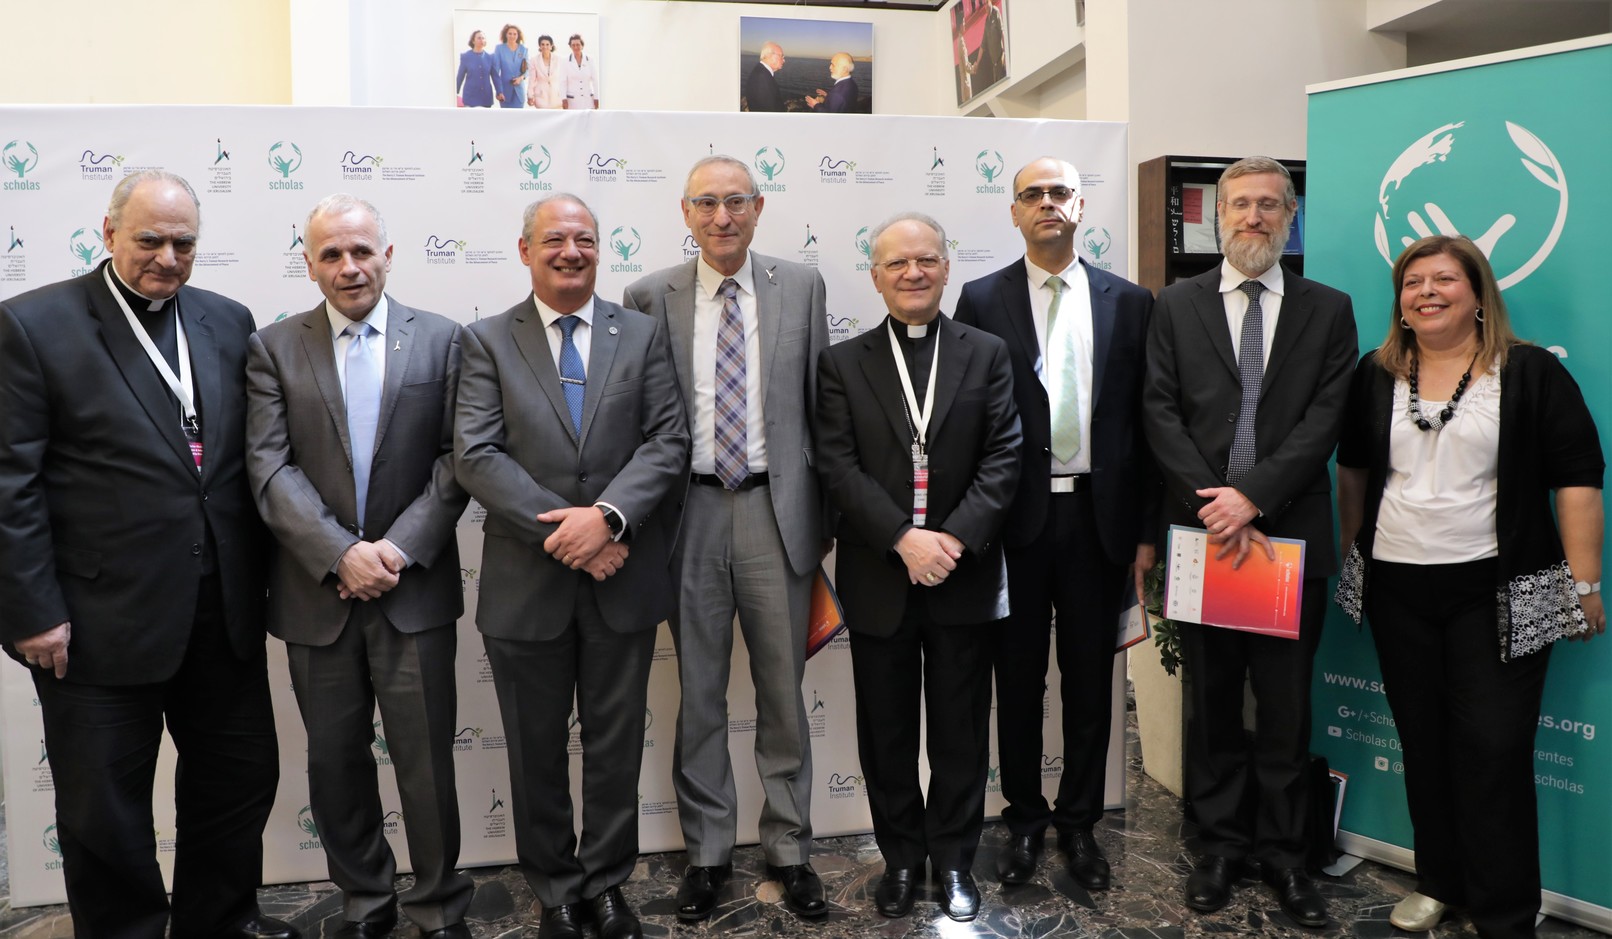 (L to R) Marcelo Sánchez Sorondo, Vice President of Pontifical Foundation Scholas Occurrentes and Great Chancellor of the Pontifical Academy of Sciences; Prof. Asher Cohen, Rector and President-Elect of Hebrew University; José María del Corral, President of the Pontifical Foundation Scholas Occurrentes; Prof. Menahem Ben-Sasson, President of Hebrew University; Mons. Angelo Zani, General Secretary of the Congregation For Catholic Education; Kadi Iyad Zahalka, The Kadi of Jerusalem and the Head of the Sharia Courts of Israel; Rabbi Dr. Shlomo Dov Rosen, the Rabbi of Yakar Congregation in Jerusalem;  and Ms. Naama Shpeter, Executive Director of the Truman Institute and Conference Chair. (Credit: Scholas Occurentes)